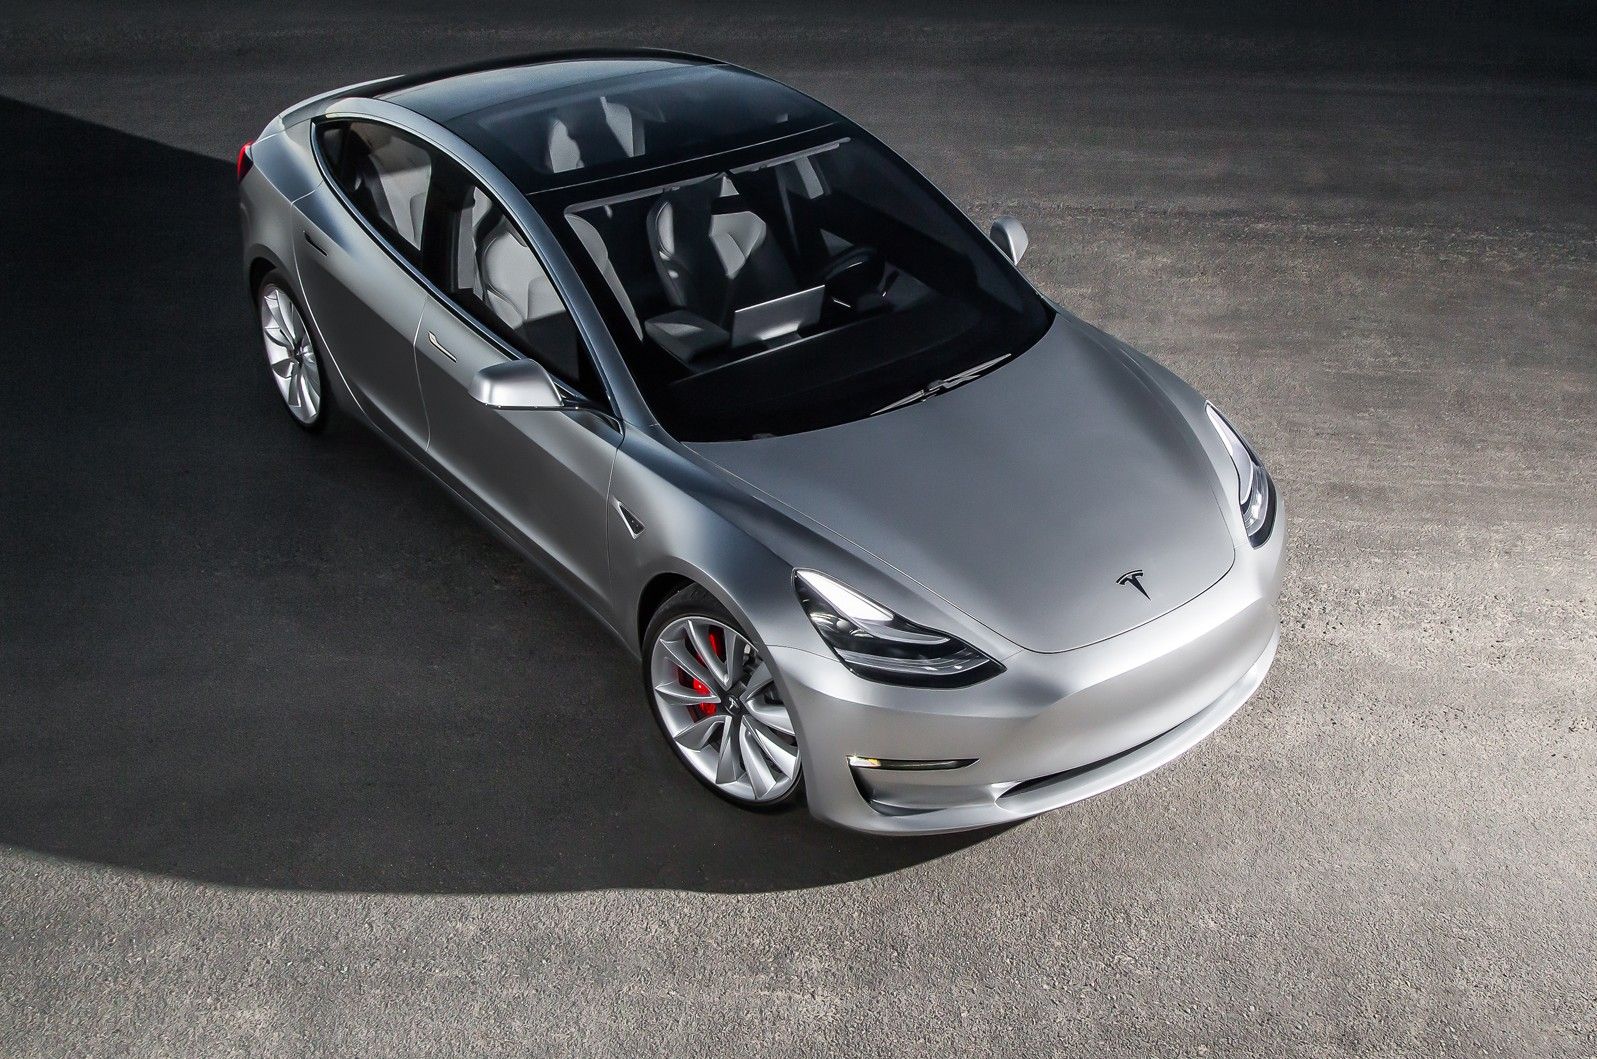 tesla-model-3-will-have-solar-glass-like-the-same-tech-used-in-solar-roof.jpg